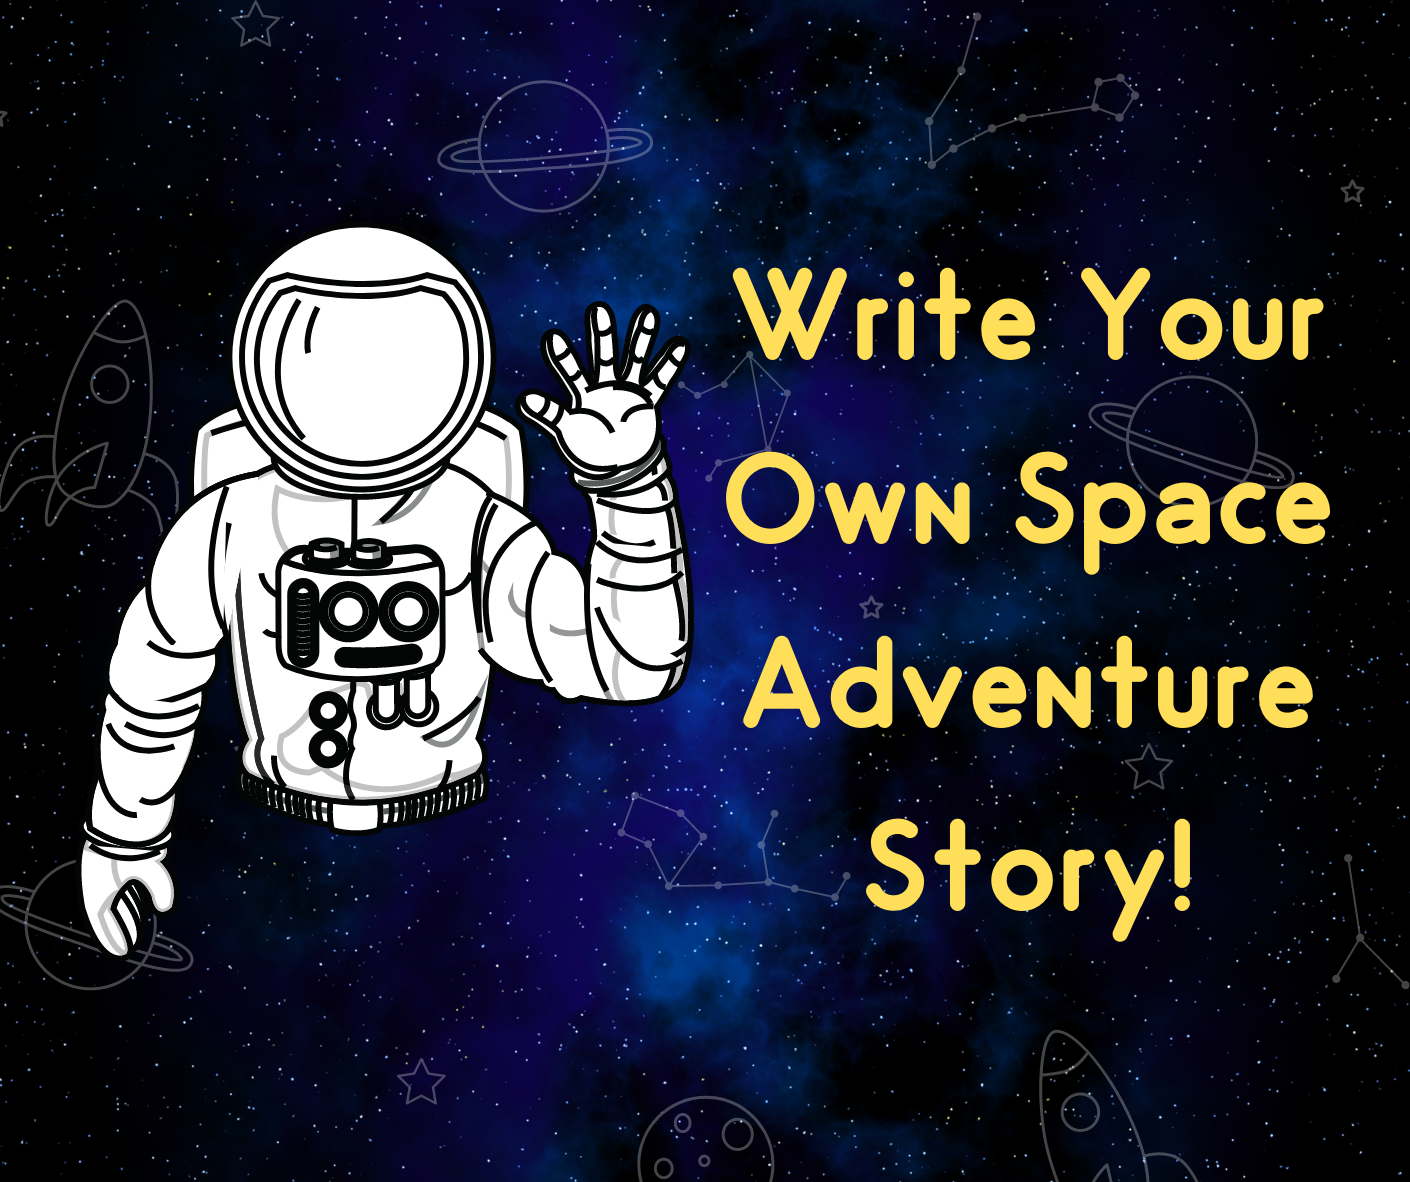 my trip to space story